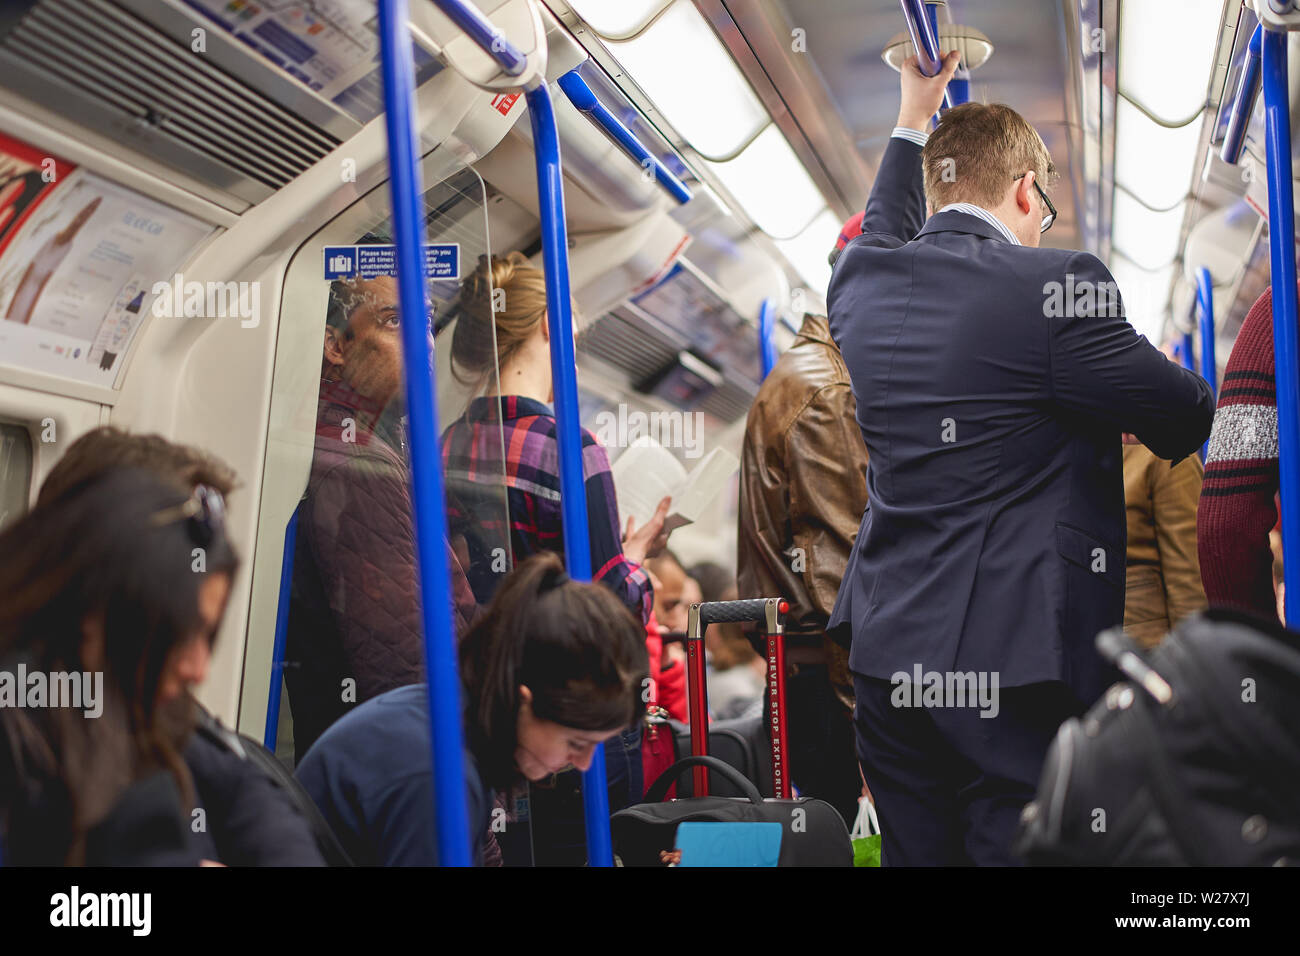 London, UK - February, 2019. People commuting on an underground train in London. The Tube handles up to 5 Million passenger per day. Stock Photo